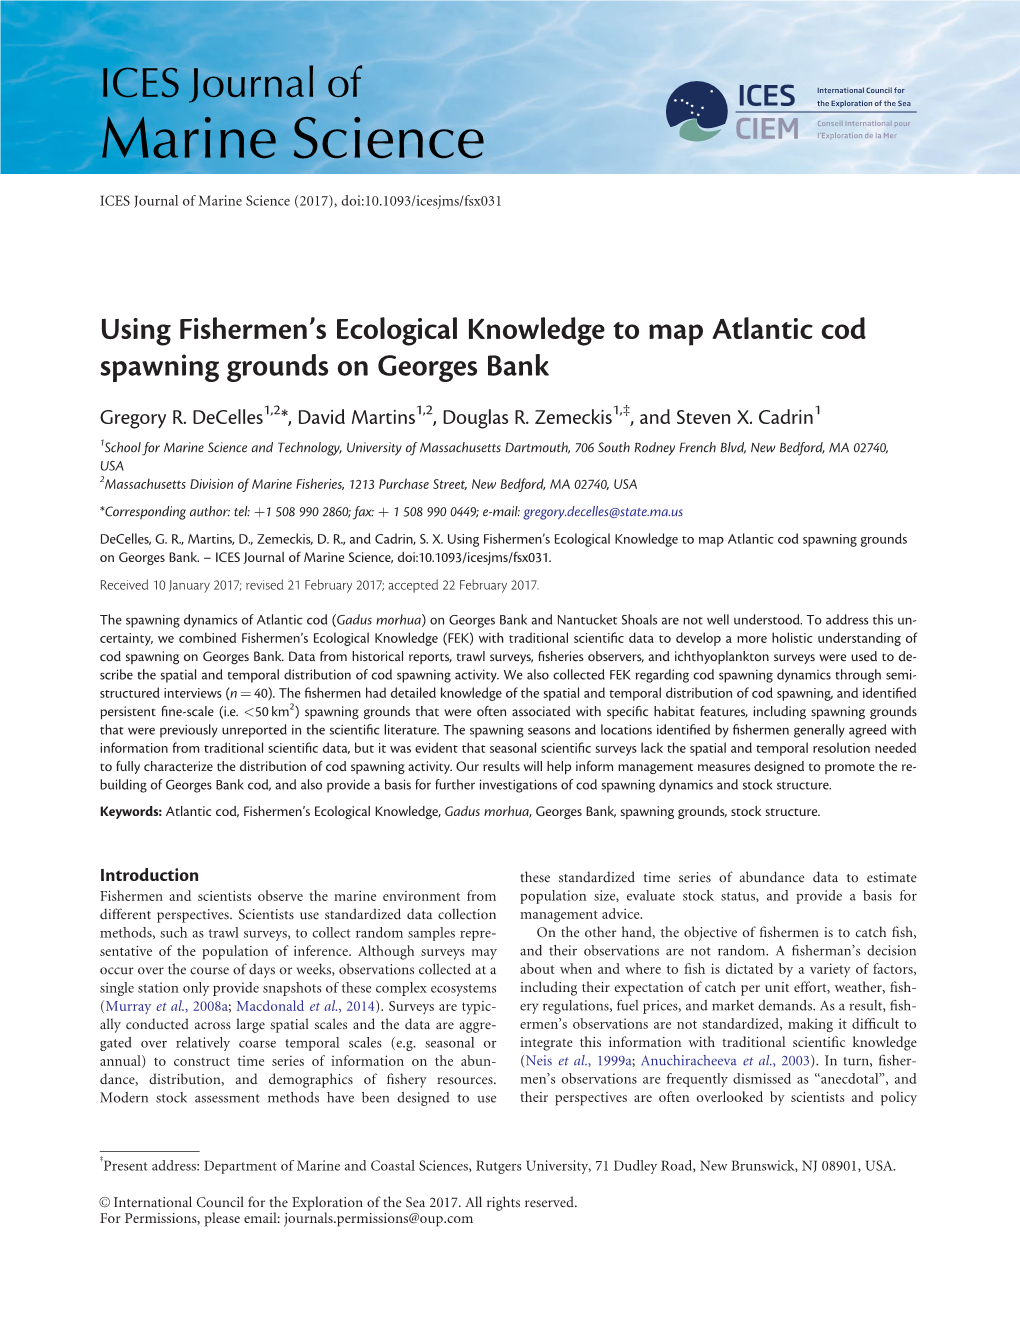 Using Fishermen's Ecological Knowledge to Map Atlantic Cod